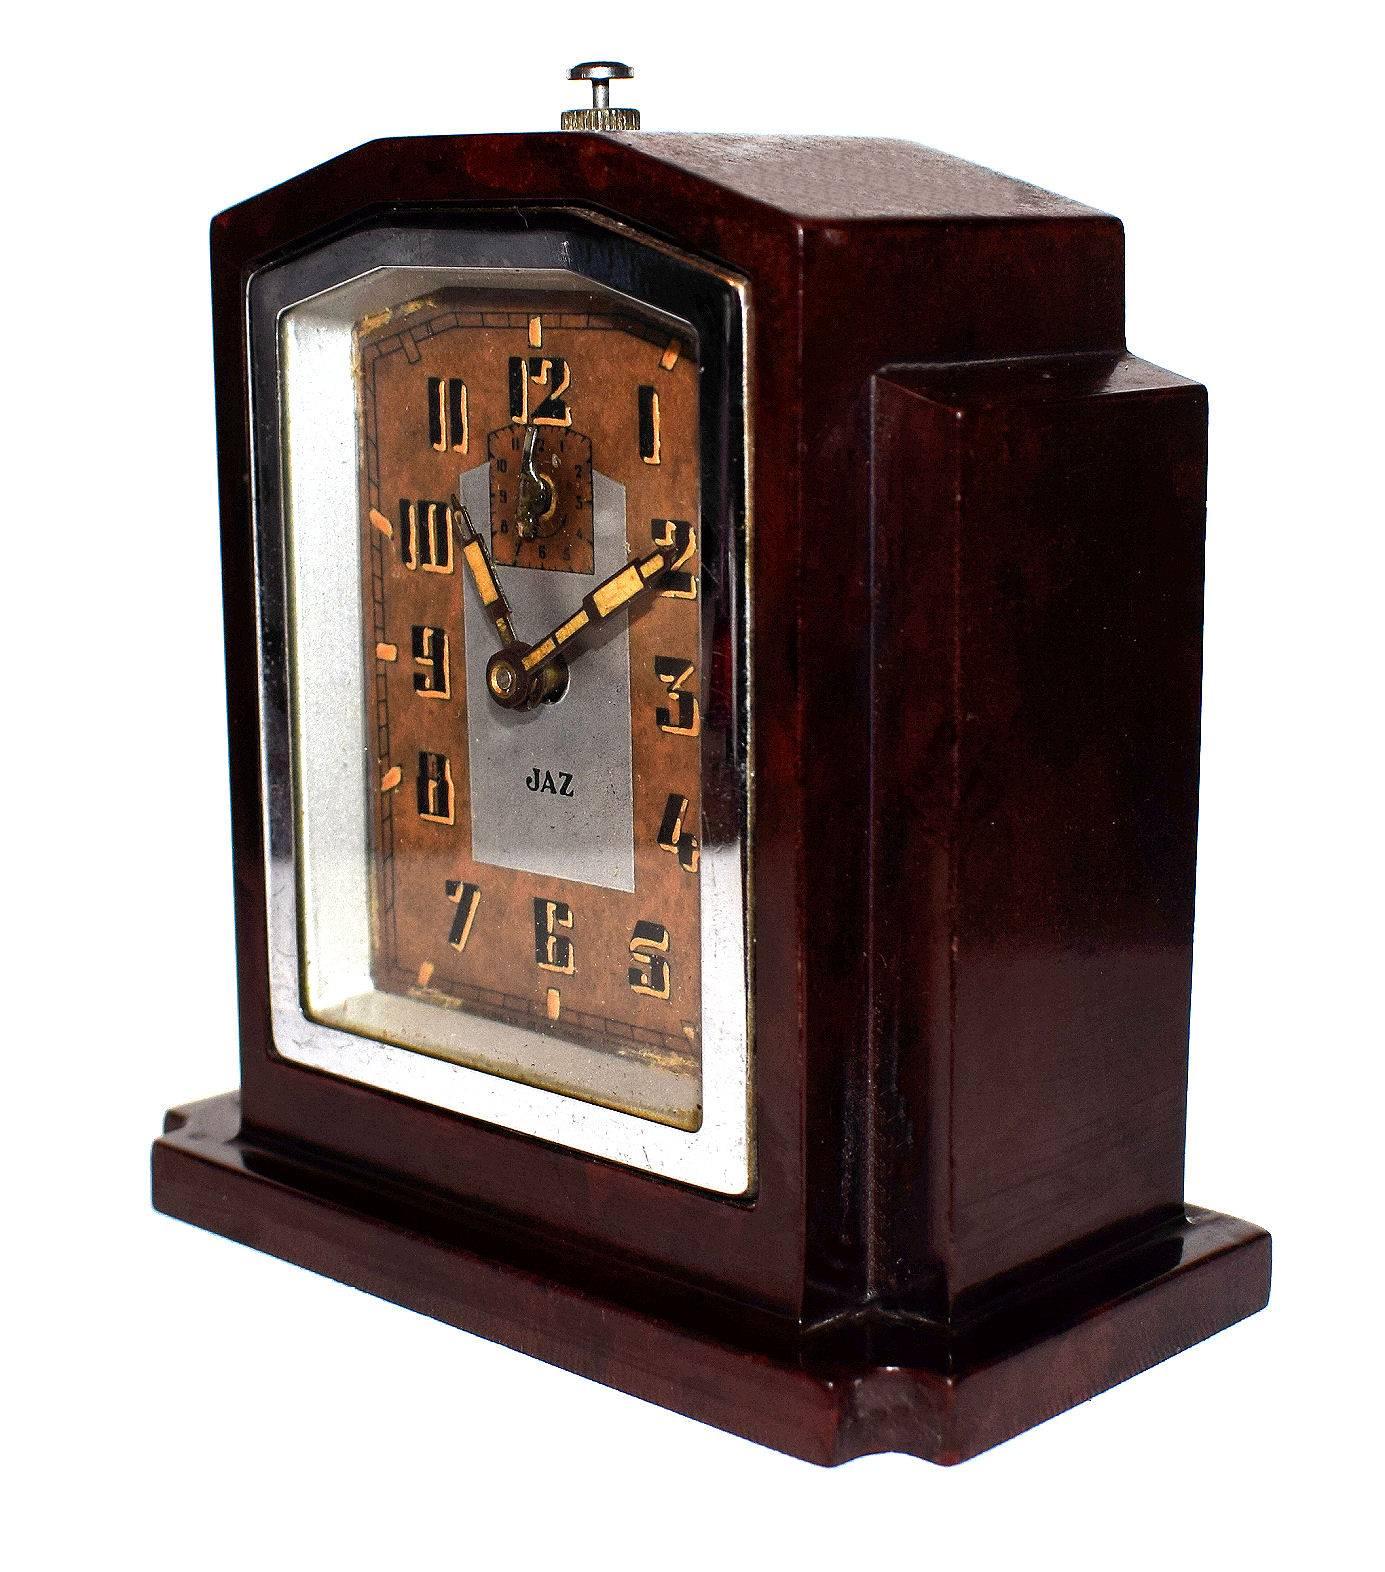 Fabulous 1930s Art Deco clock by JAZ a French clock maker. This clock is in a deep red with black speckles and wonderful skyscraper shaped casing. The condition of the face is particularly good showing little to no signs of it's true age. The